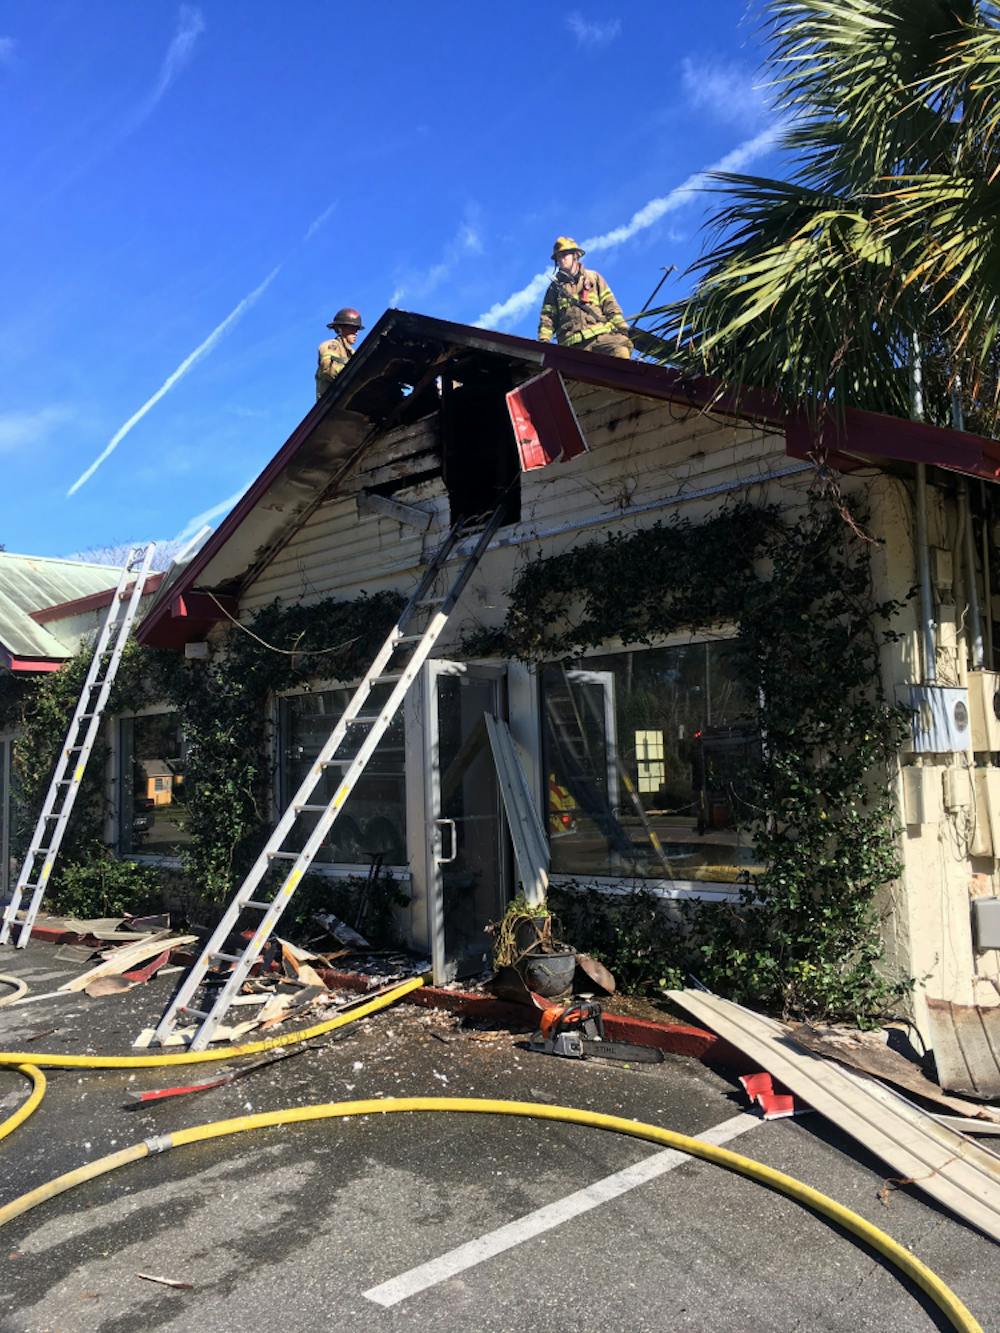 <p dir="ltr"><span>Gainesville Fire Rescue responded to a fire on the Curia on the Drag property at 2029 NW Sixth St. around noon. The official cause of the fire is unknown. Courtesy to The Alligator.</span></p><p><span> </span></p>